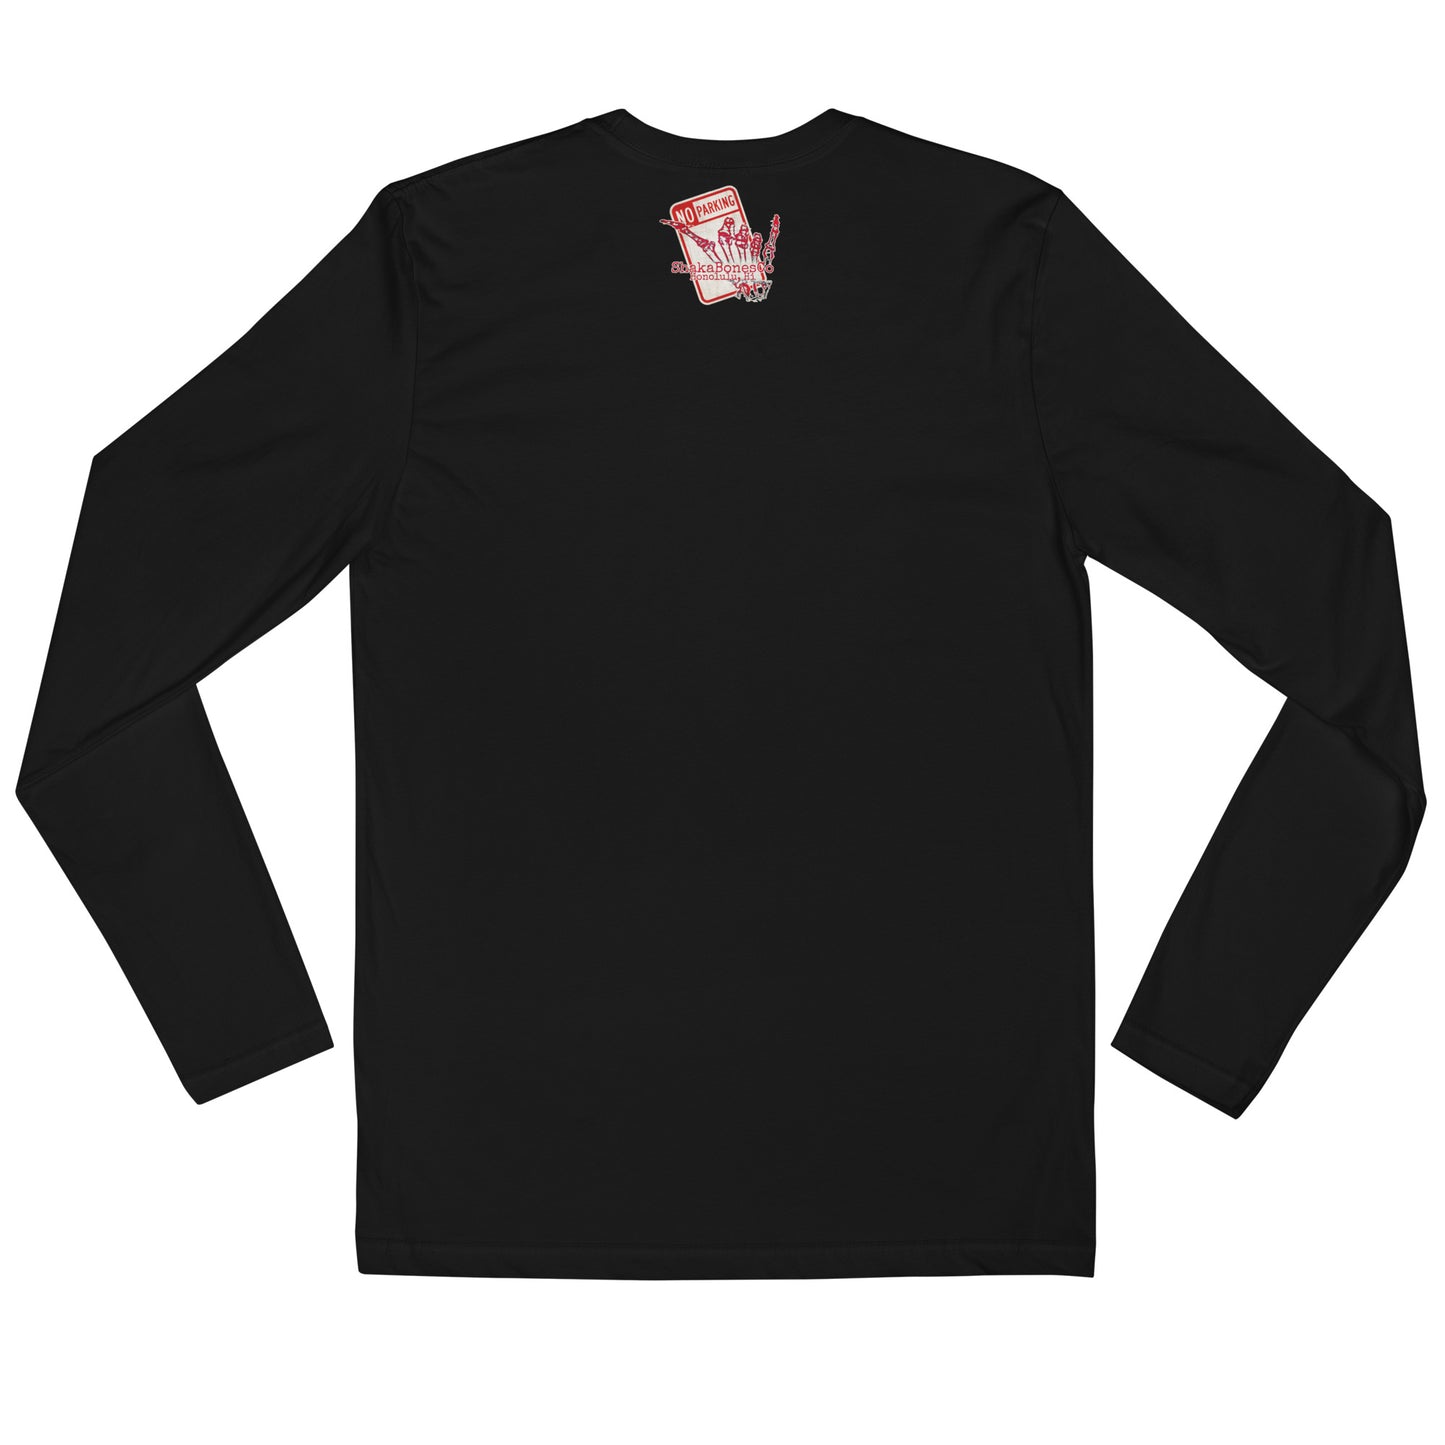 Waiks Banyan Long Sleeve Fitted Crew